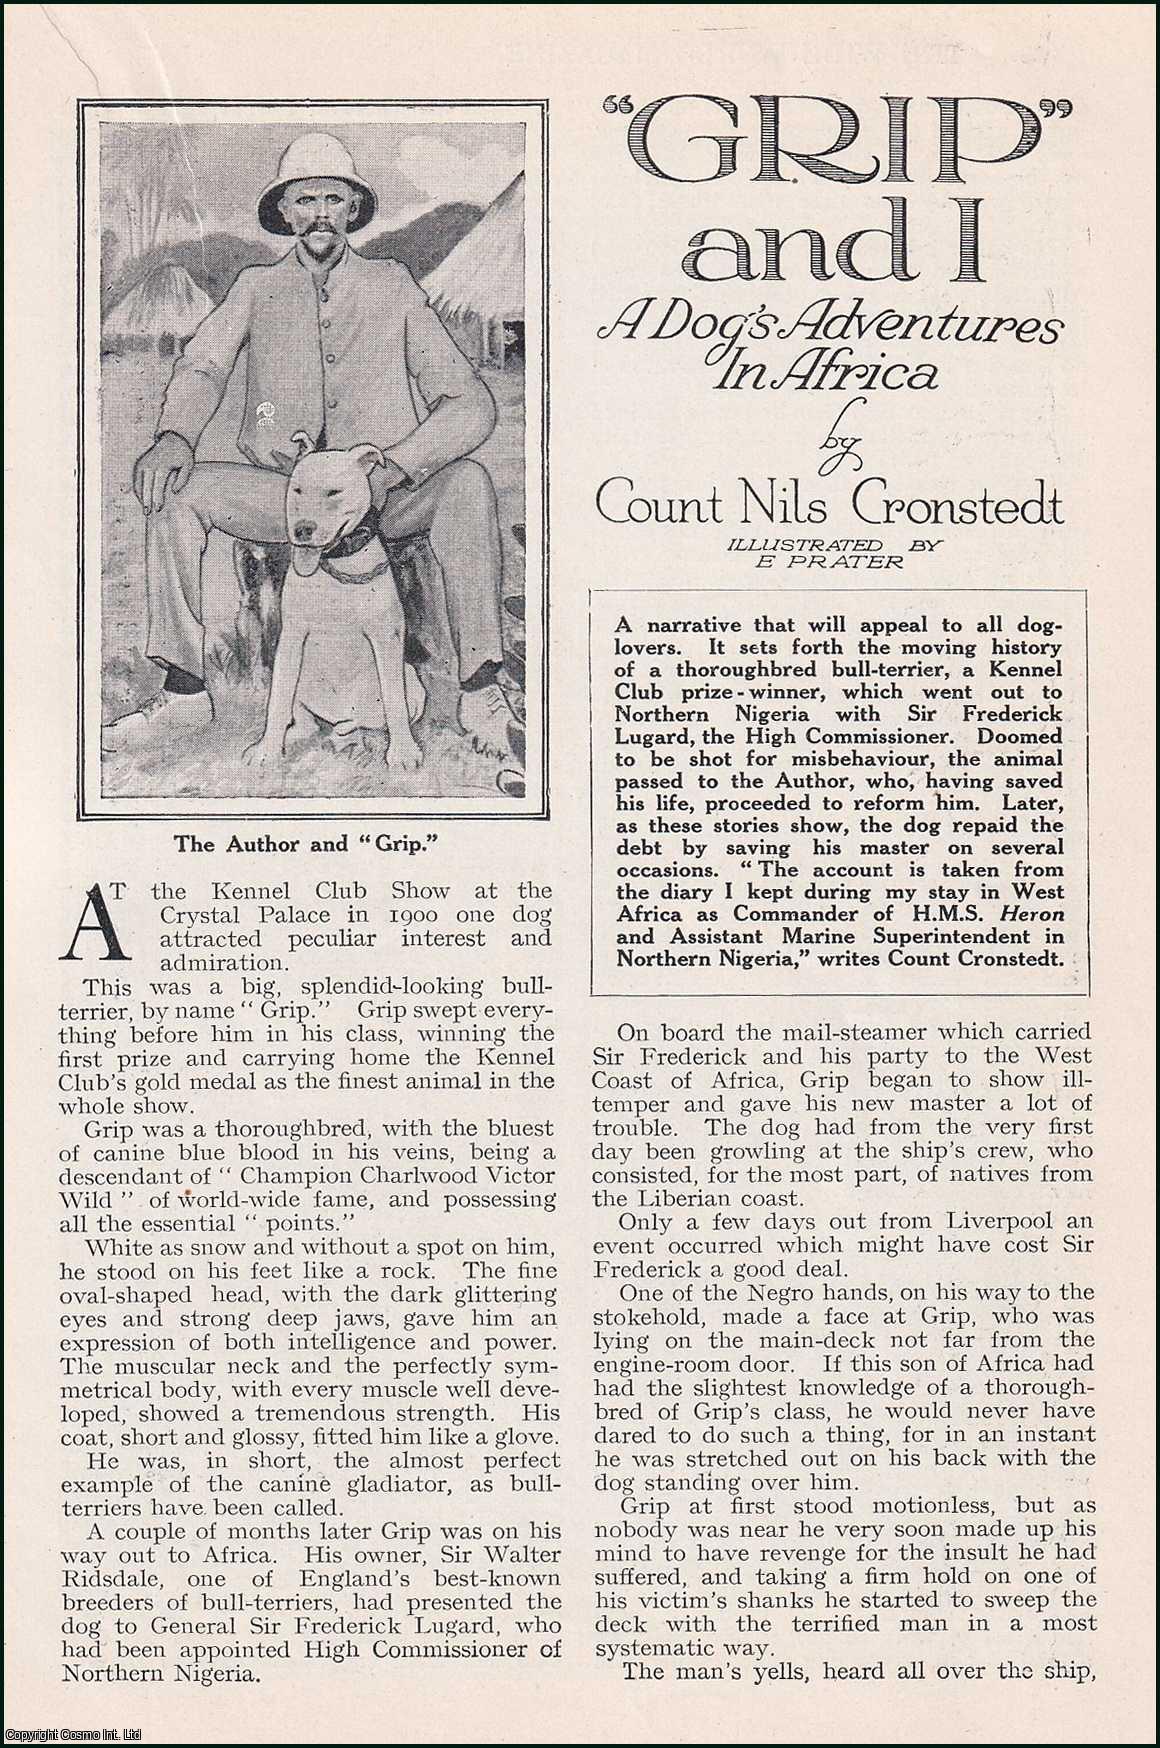 Count Nils Cronstedt. Illustrated by E. Prater. - Grip & I : a Bull-Terrier Dog's Adventures in Africa. A Kennel Club Prize-Winner. An uncommon original article from the Wide World Magazine, 1923.